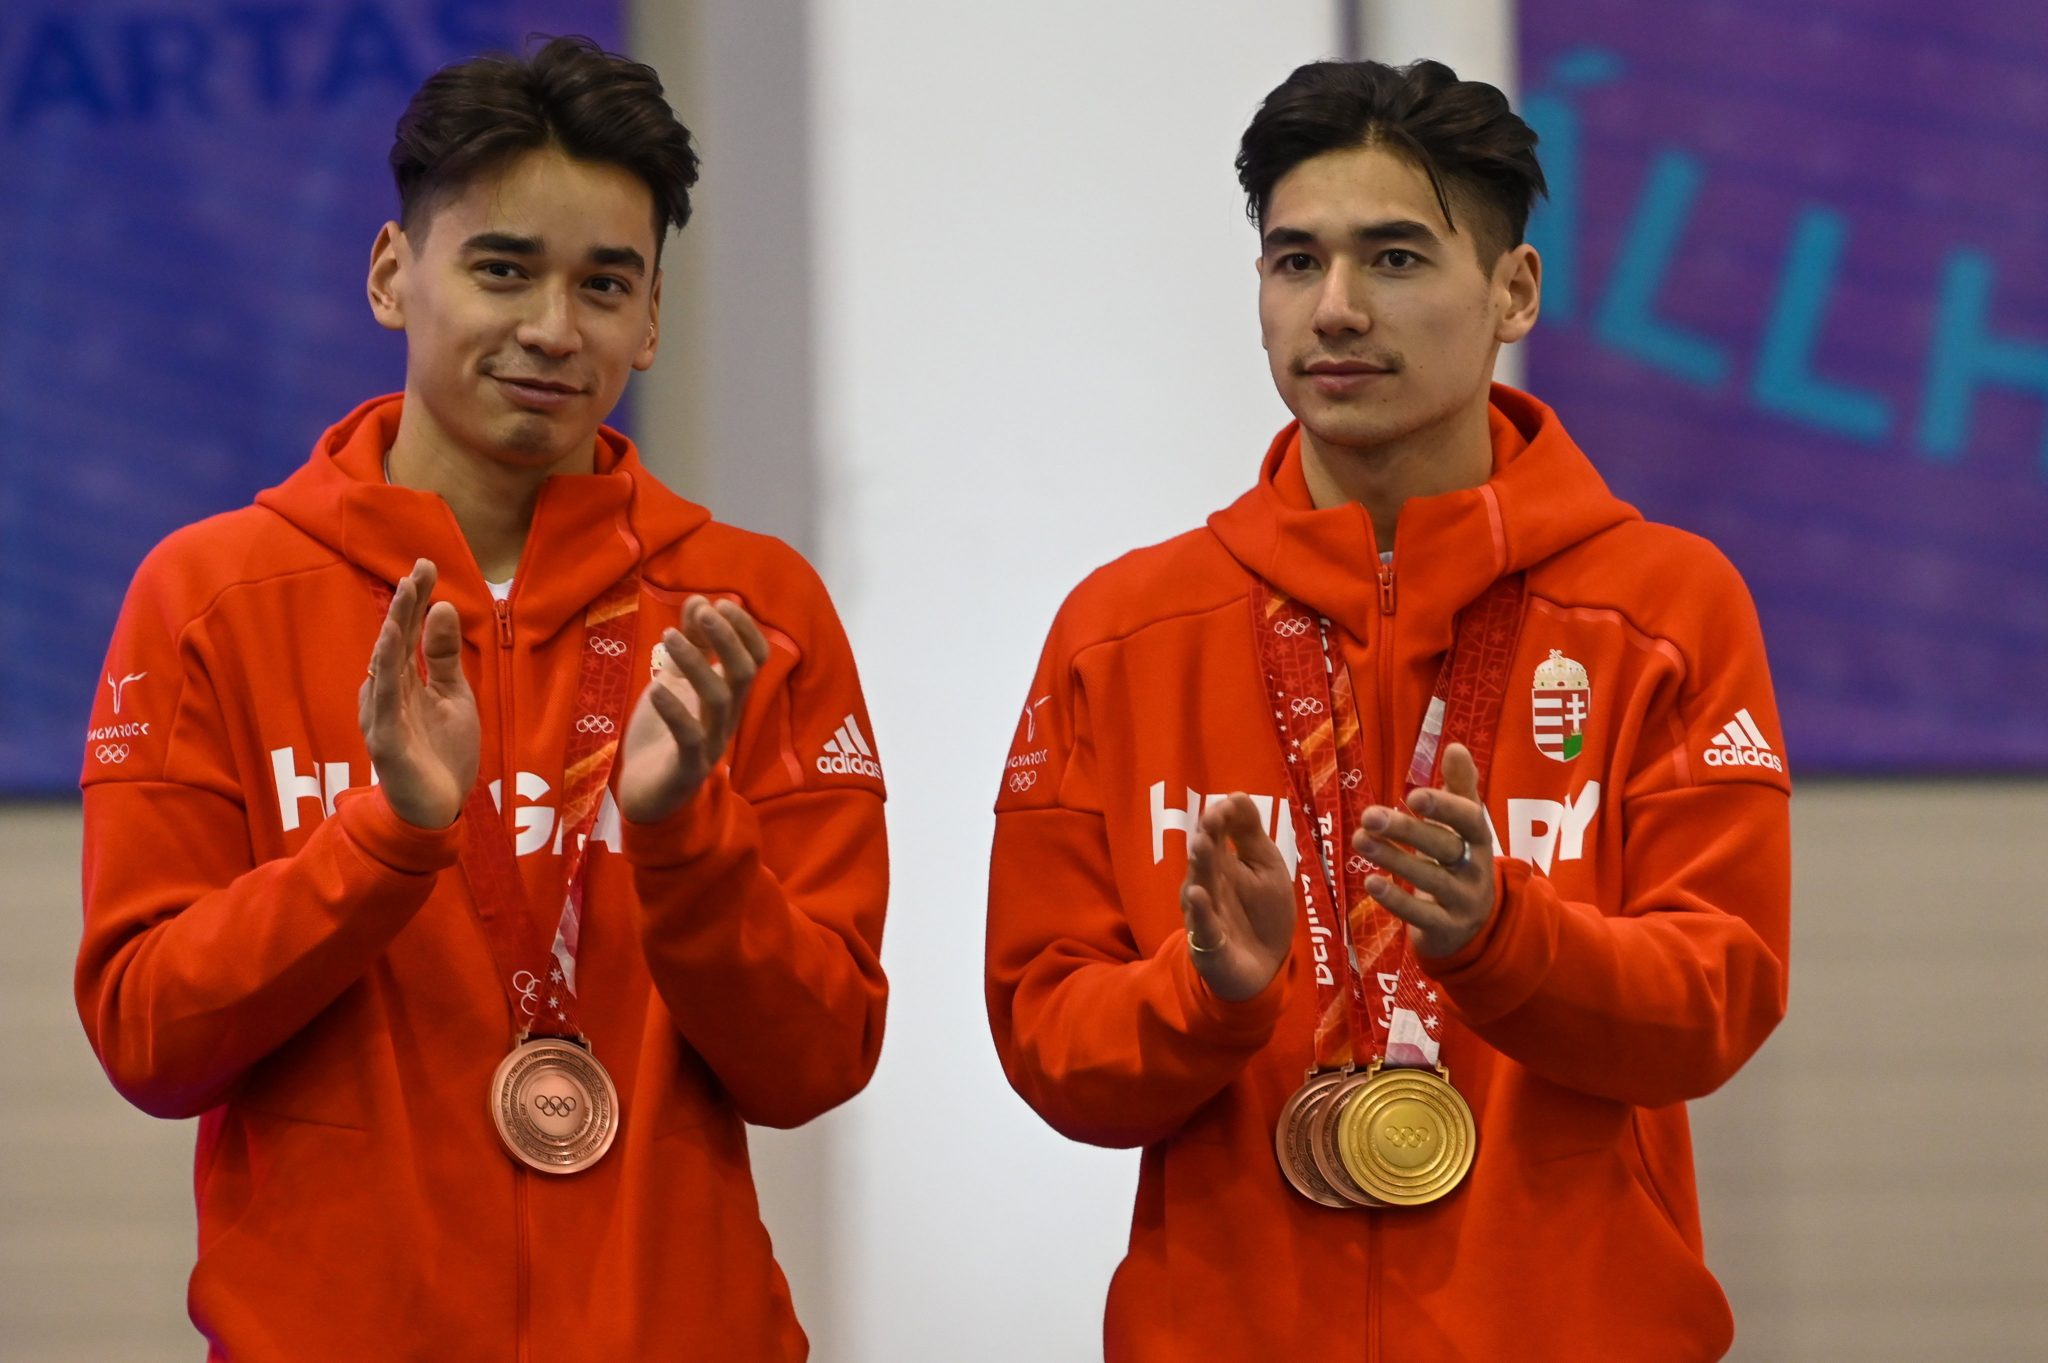 Olympic Speed Skater Liu Brothers Speak Out About Leaving Hungary